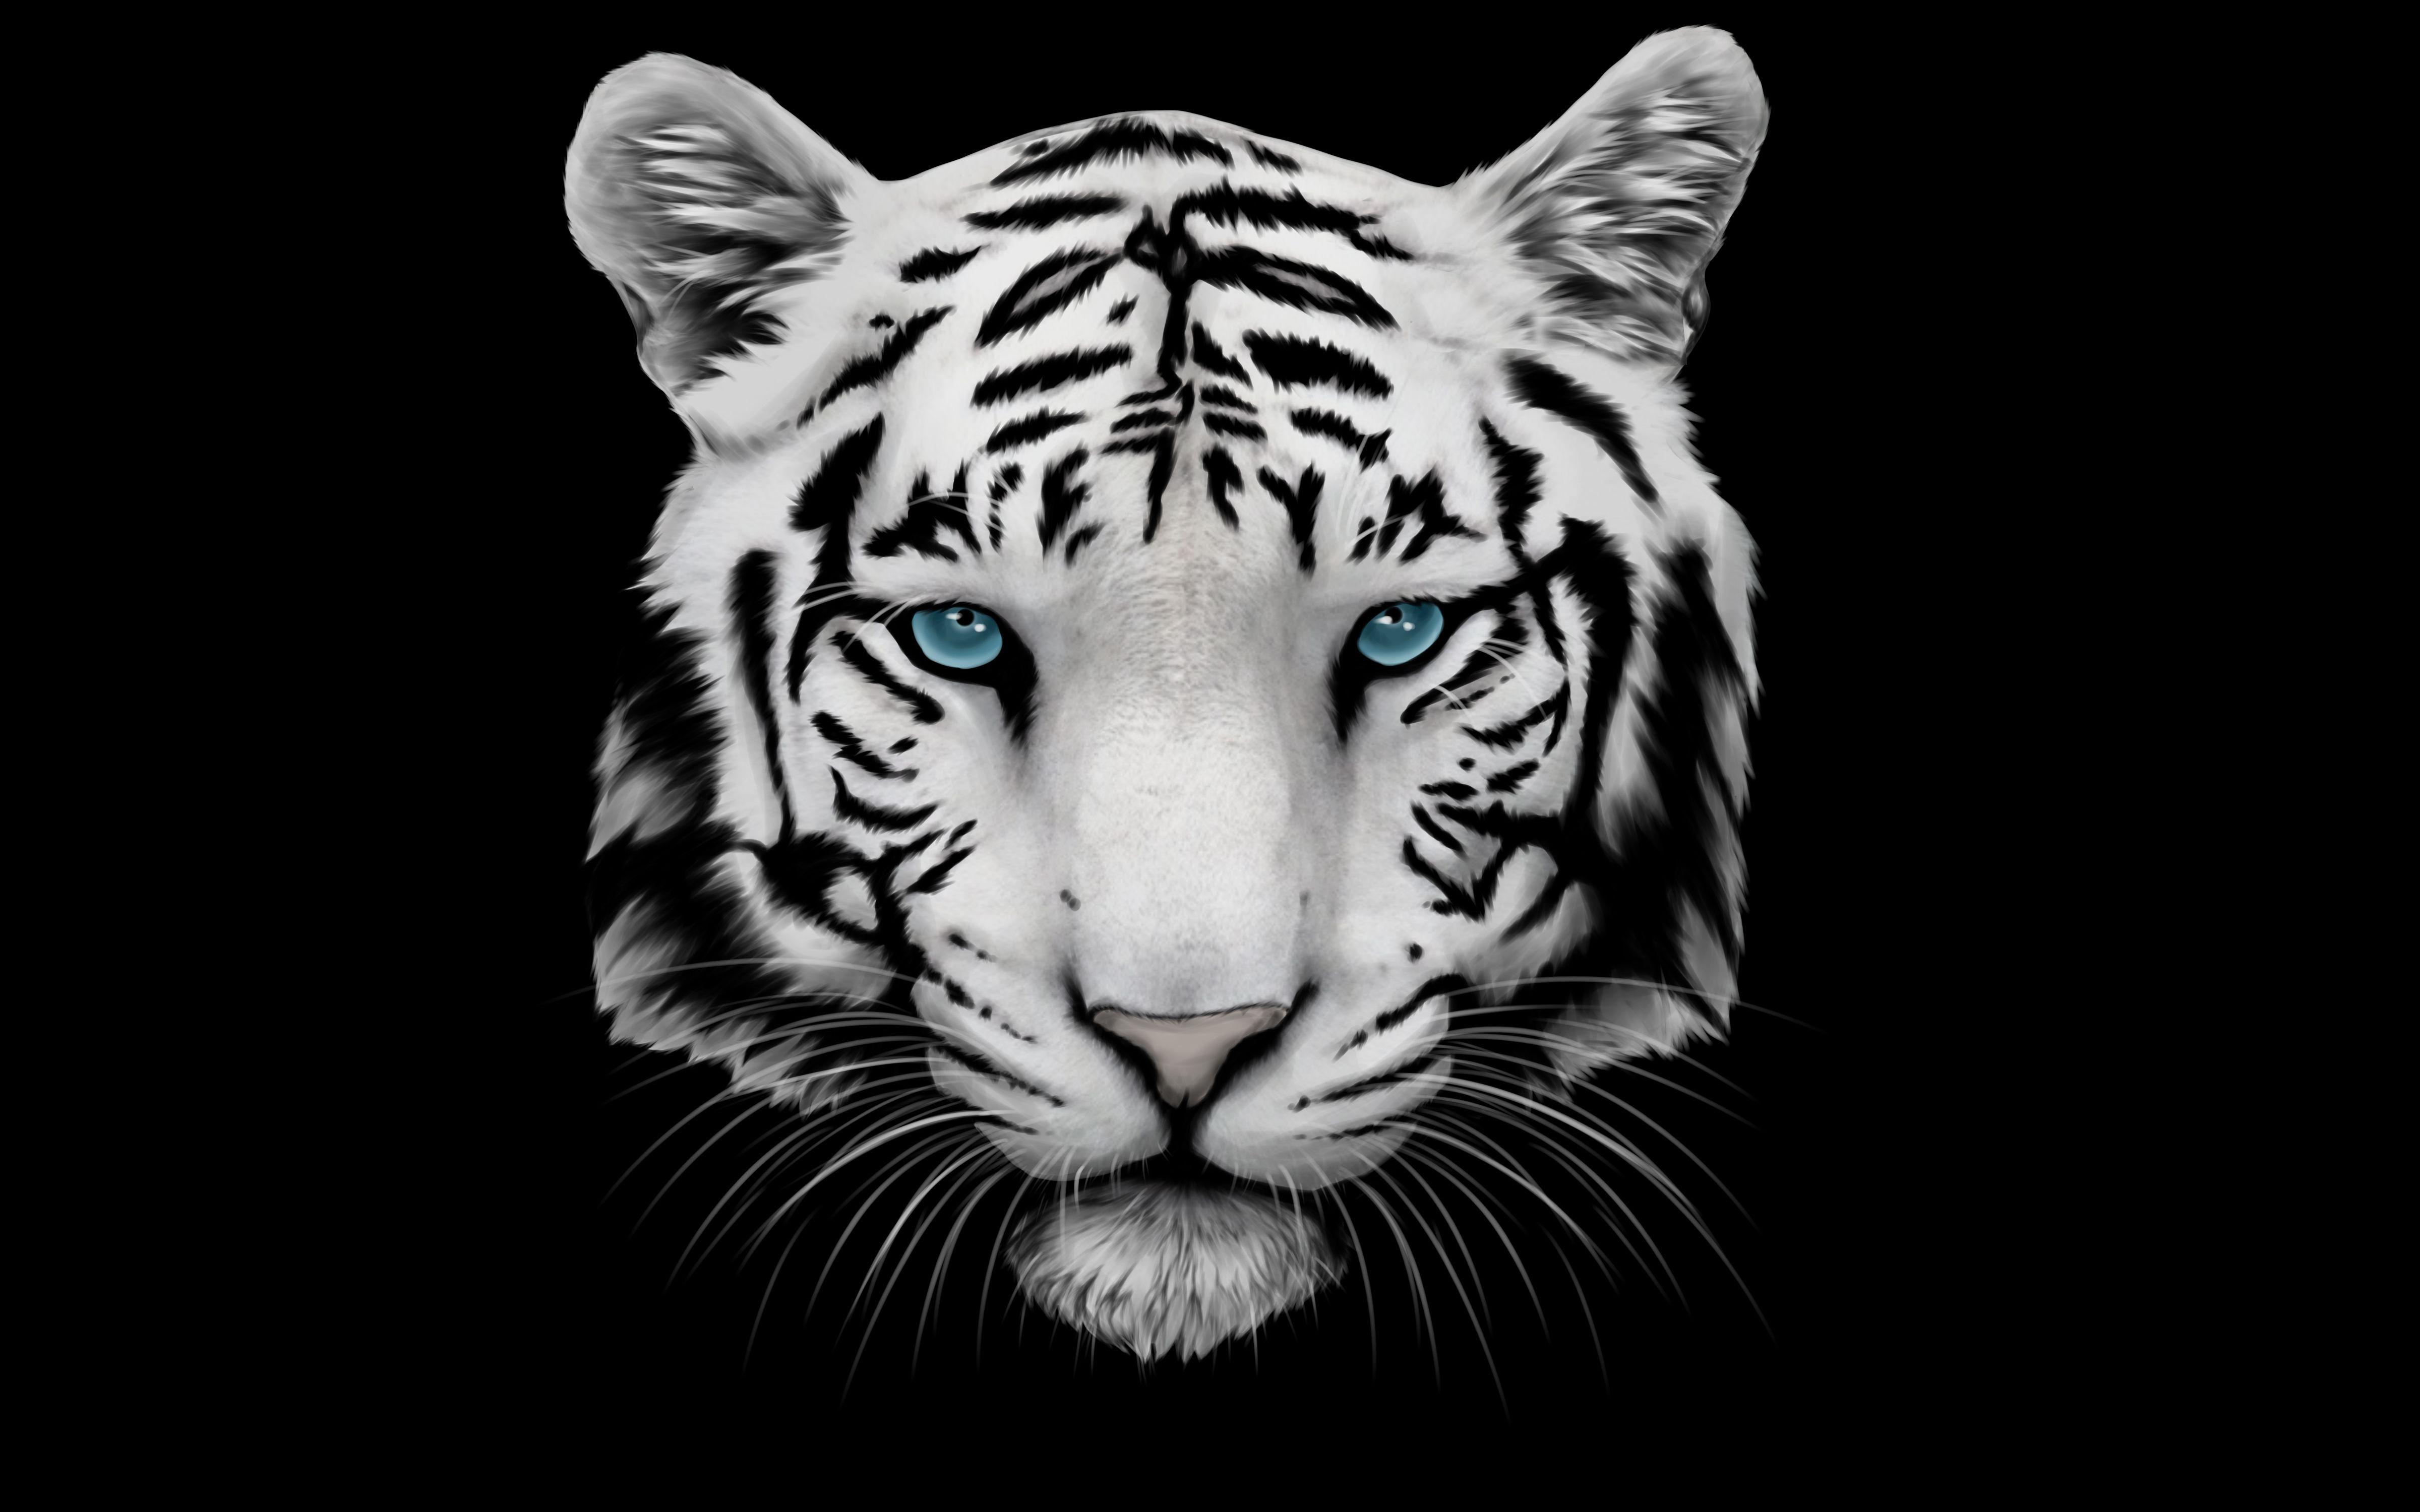 White Tiger Wallpaper High Definition. Buy Ahsan in 2019